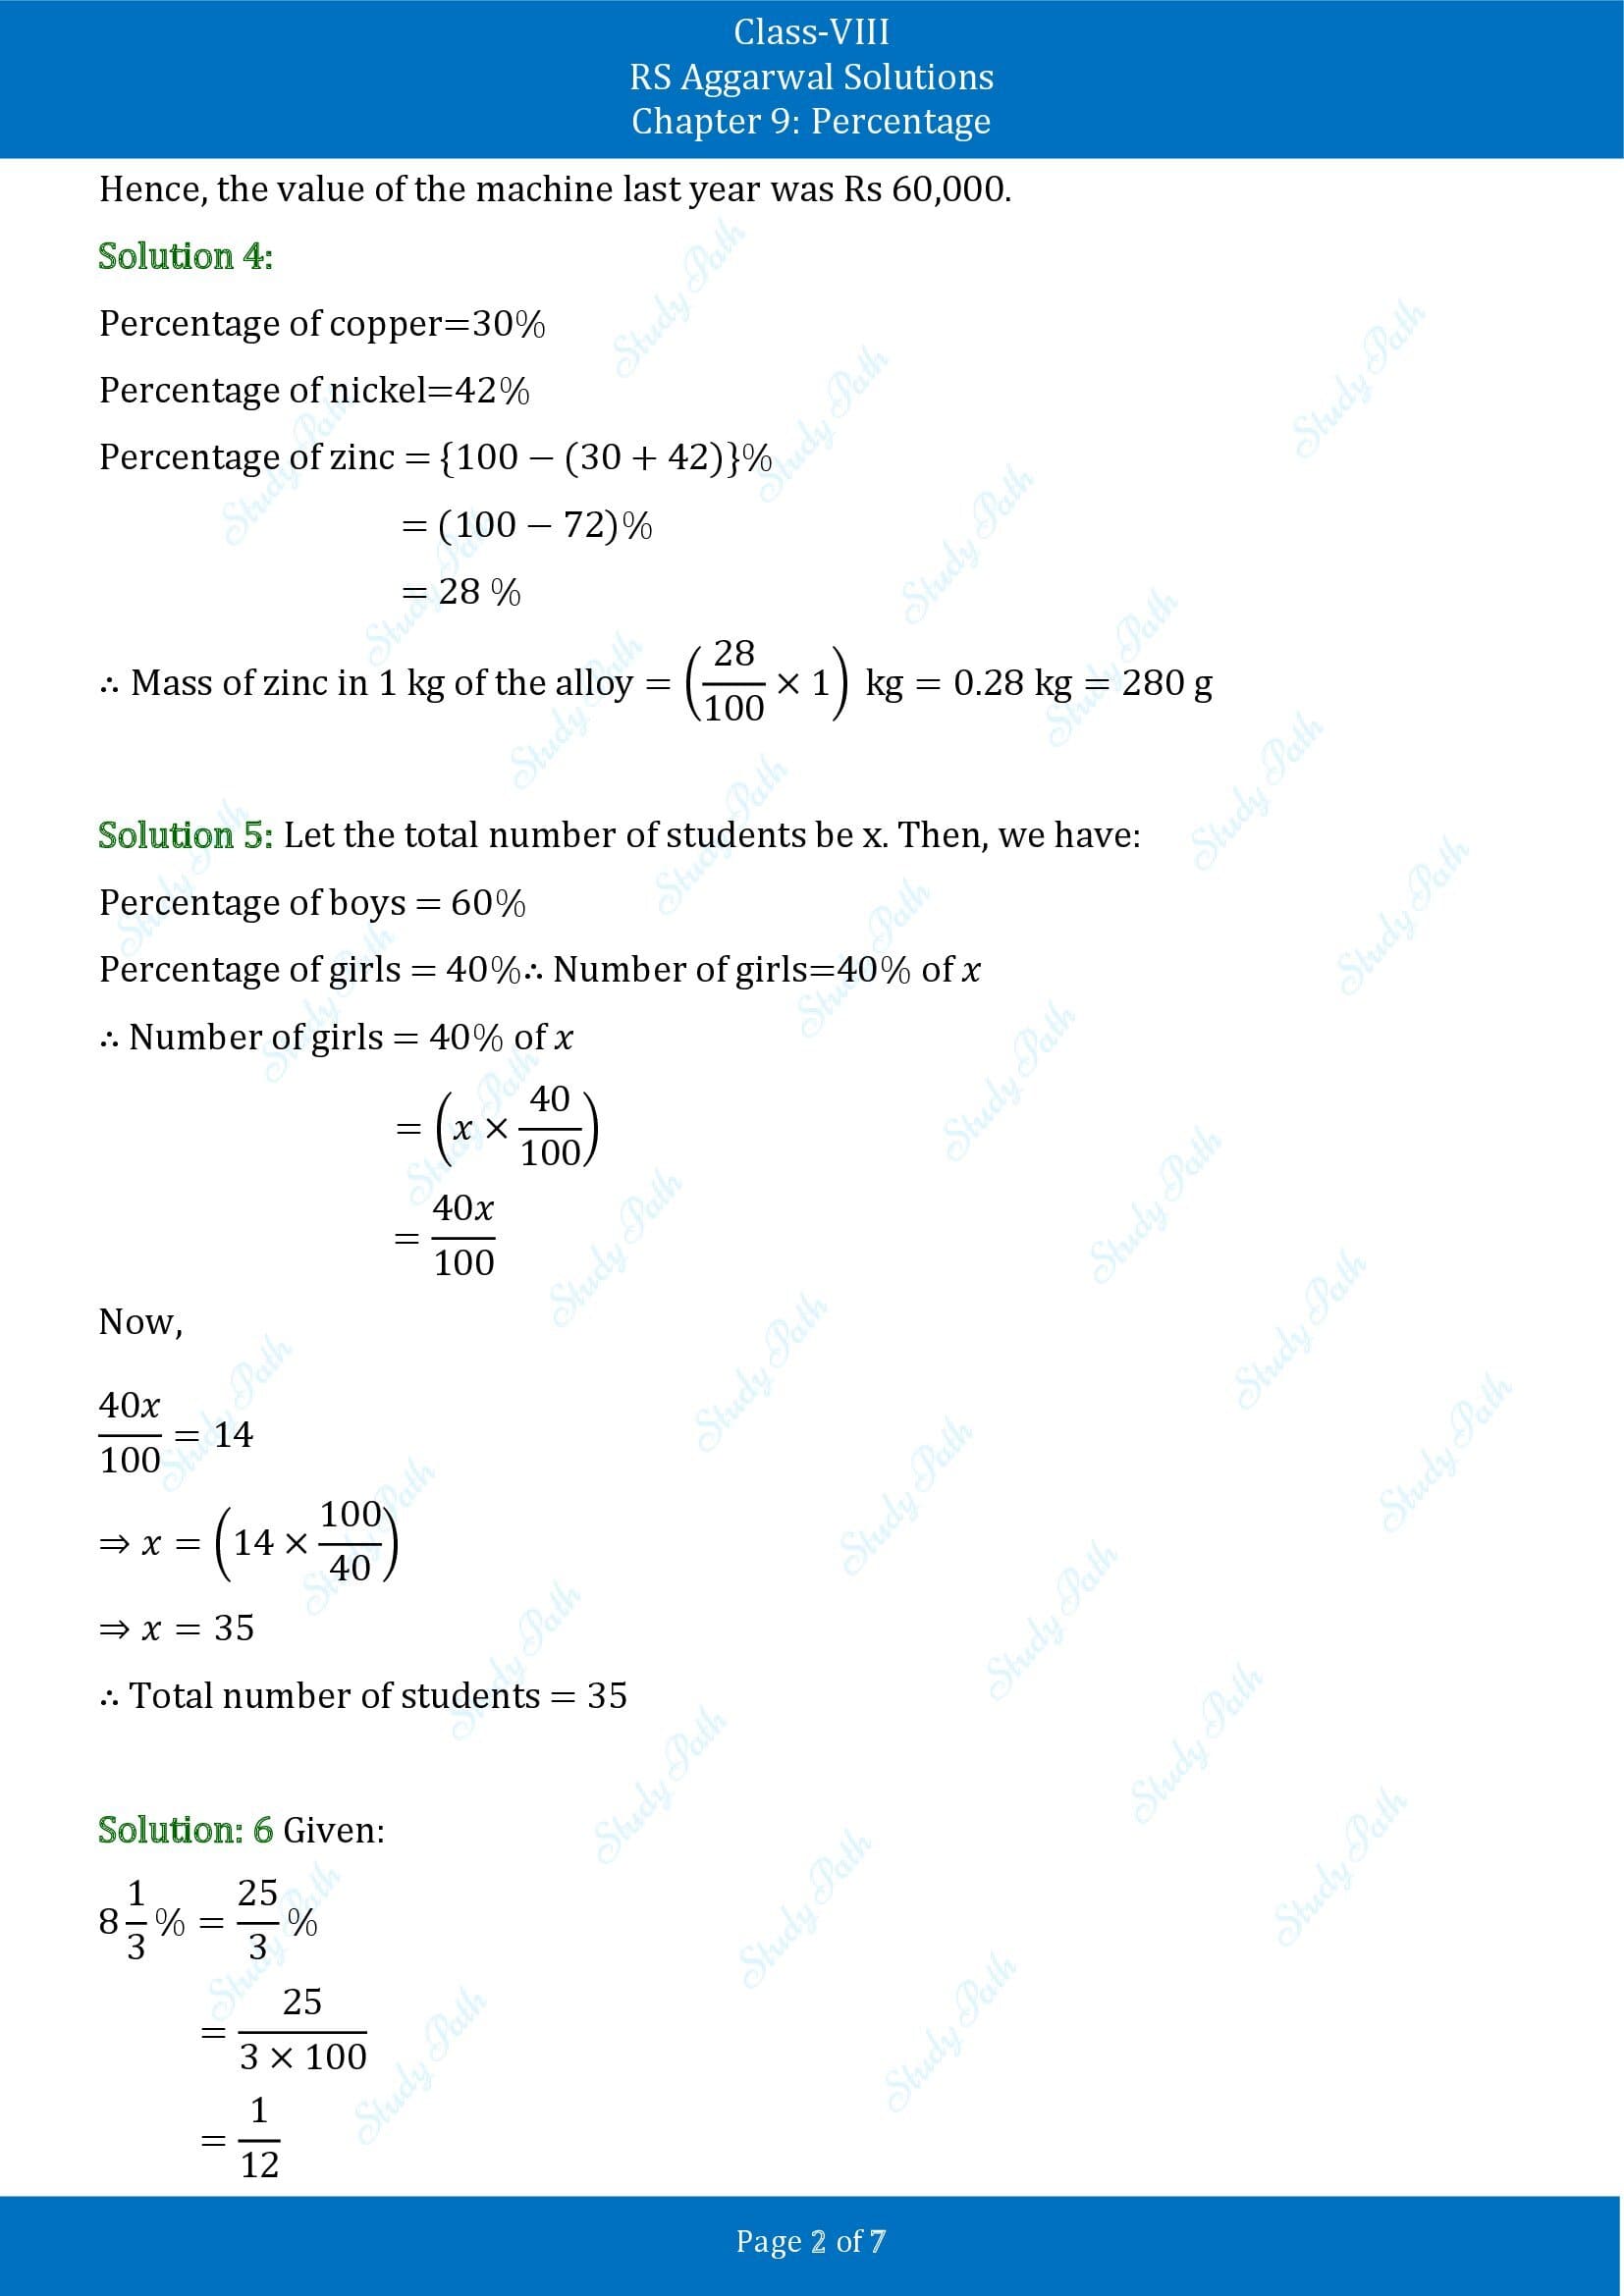 RS Aggarwal Solutions Class 8 Chapter 9 Percentage Test Paper 00002